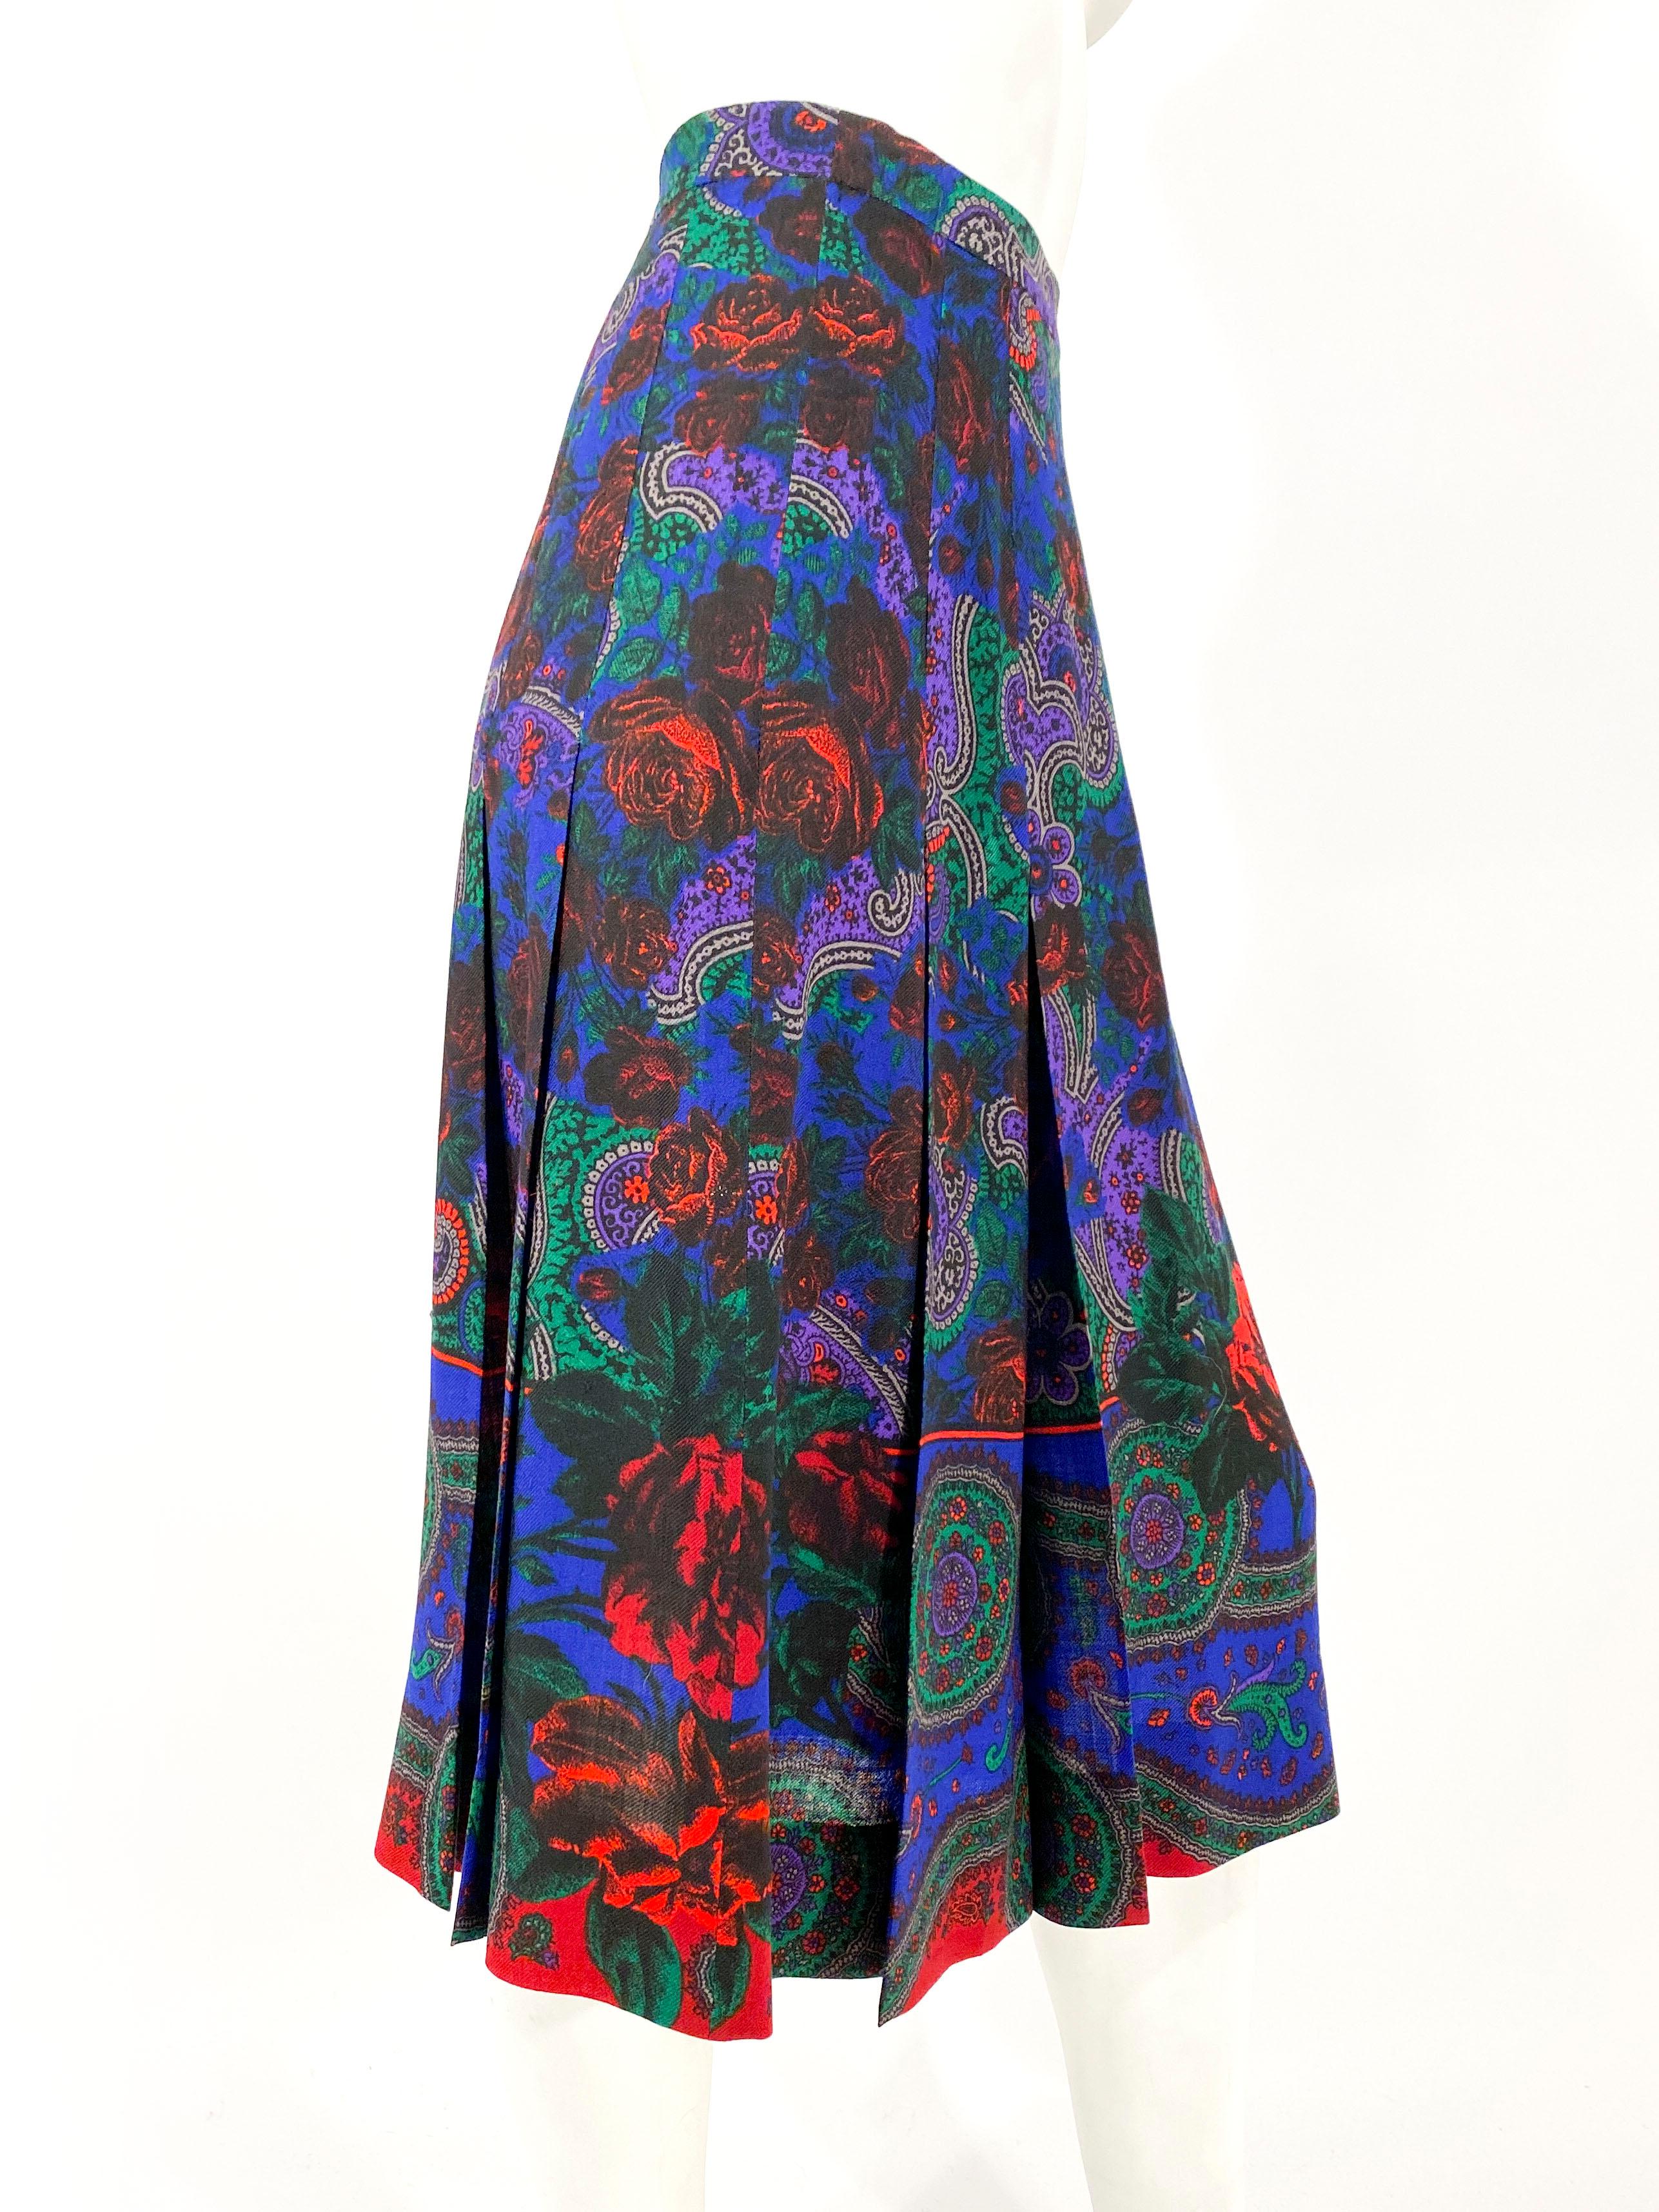 1970s Vibrant Floral Printed Wool Skirt In Good Condition For Sale In San Francisco, CA